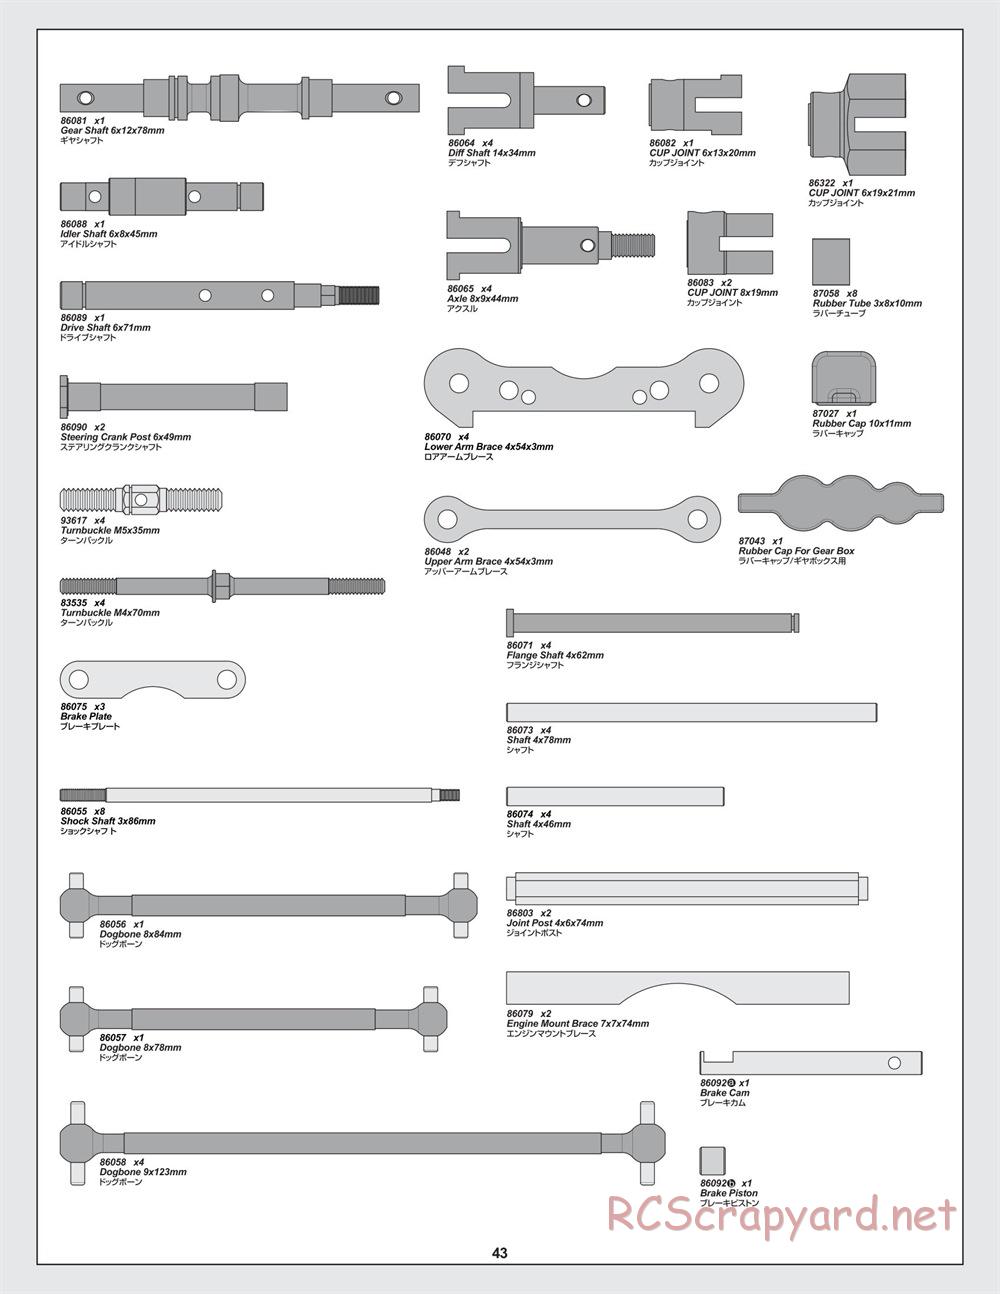 HPI - Savage-X 4.6 - Exploded View - Page 43